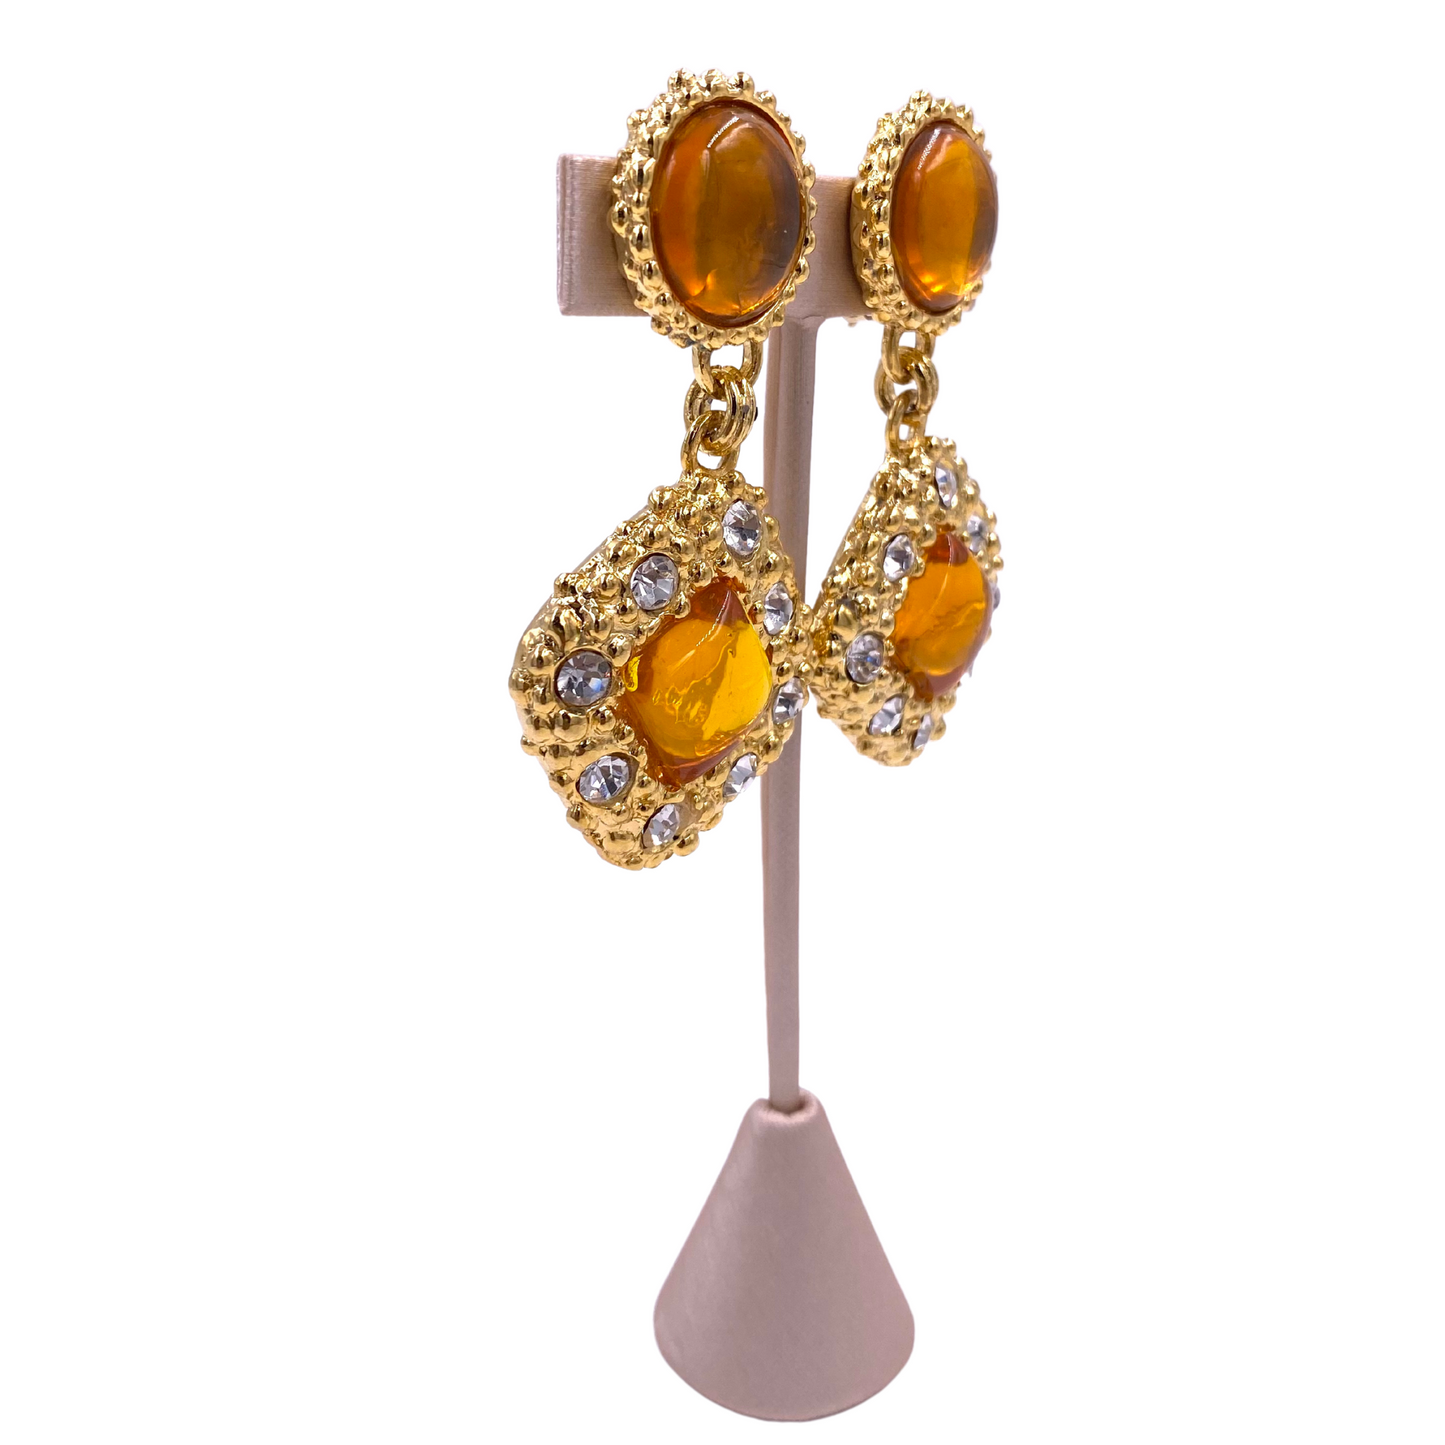 French Citrine Colored Drop Earrings with Crystals